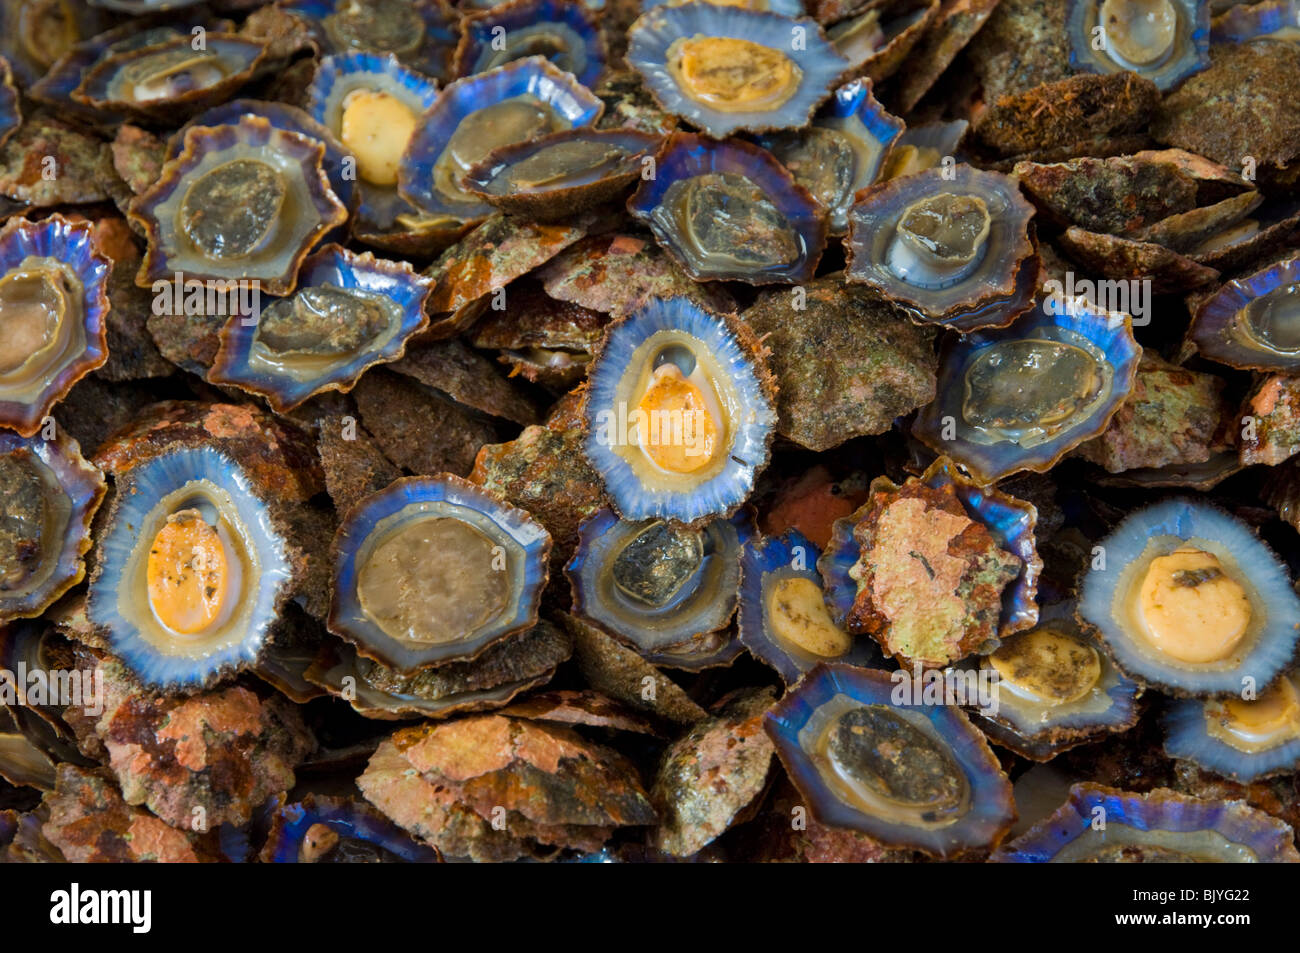 Limpets or Lapas Mercado dos Lavradores covered market for producers of island food Funchal Madeira Portugal EU Europe Stock Photo